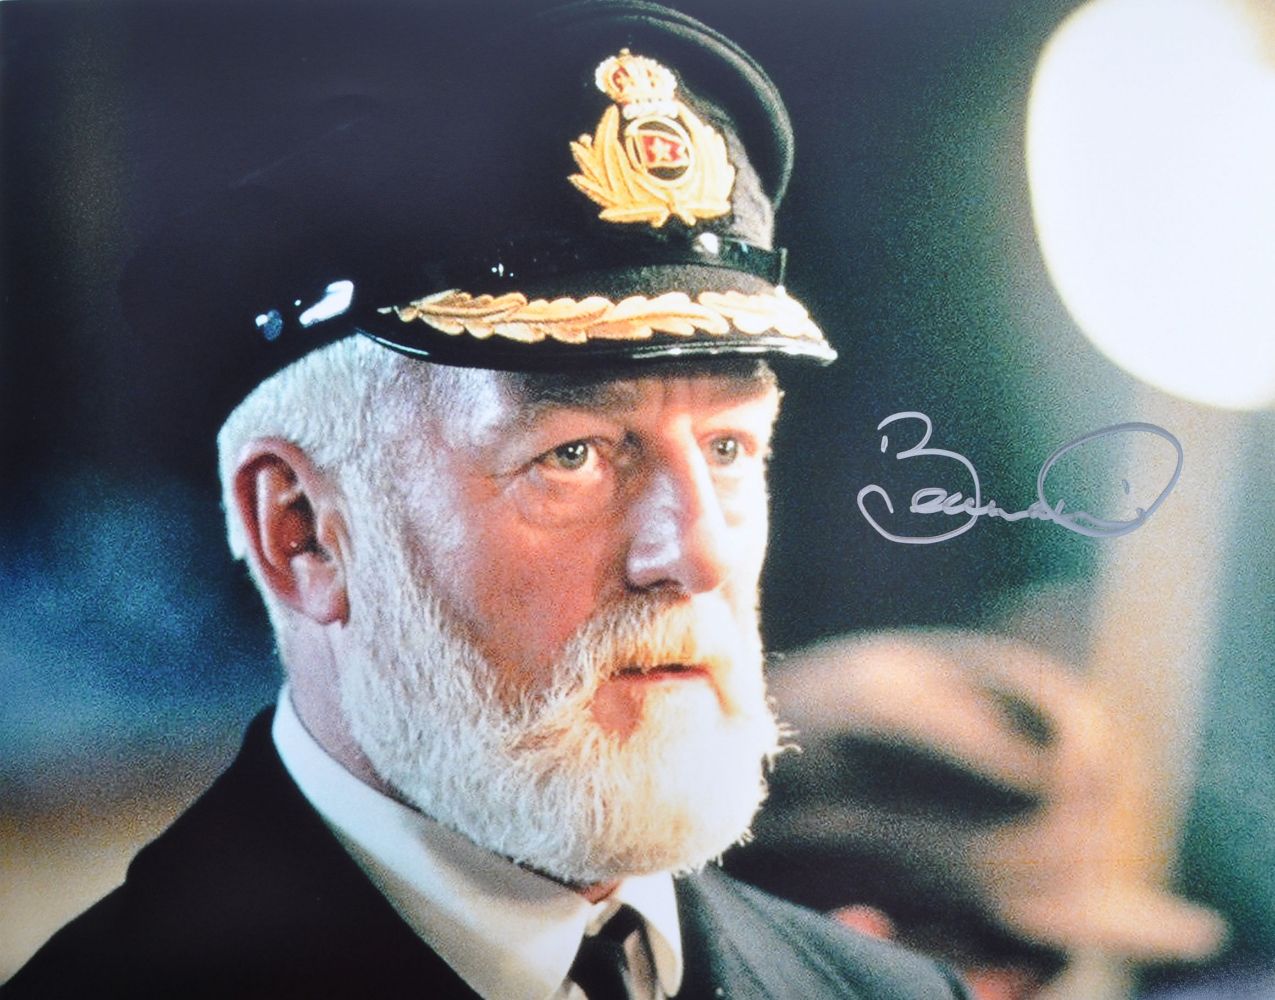 Bernard Hill - Lord Of The Rings, Titanic & Beyond - The Actor's Private Collection